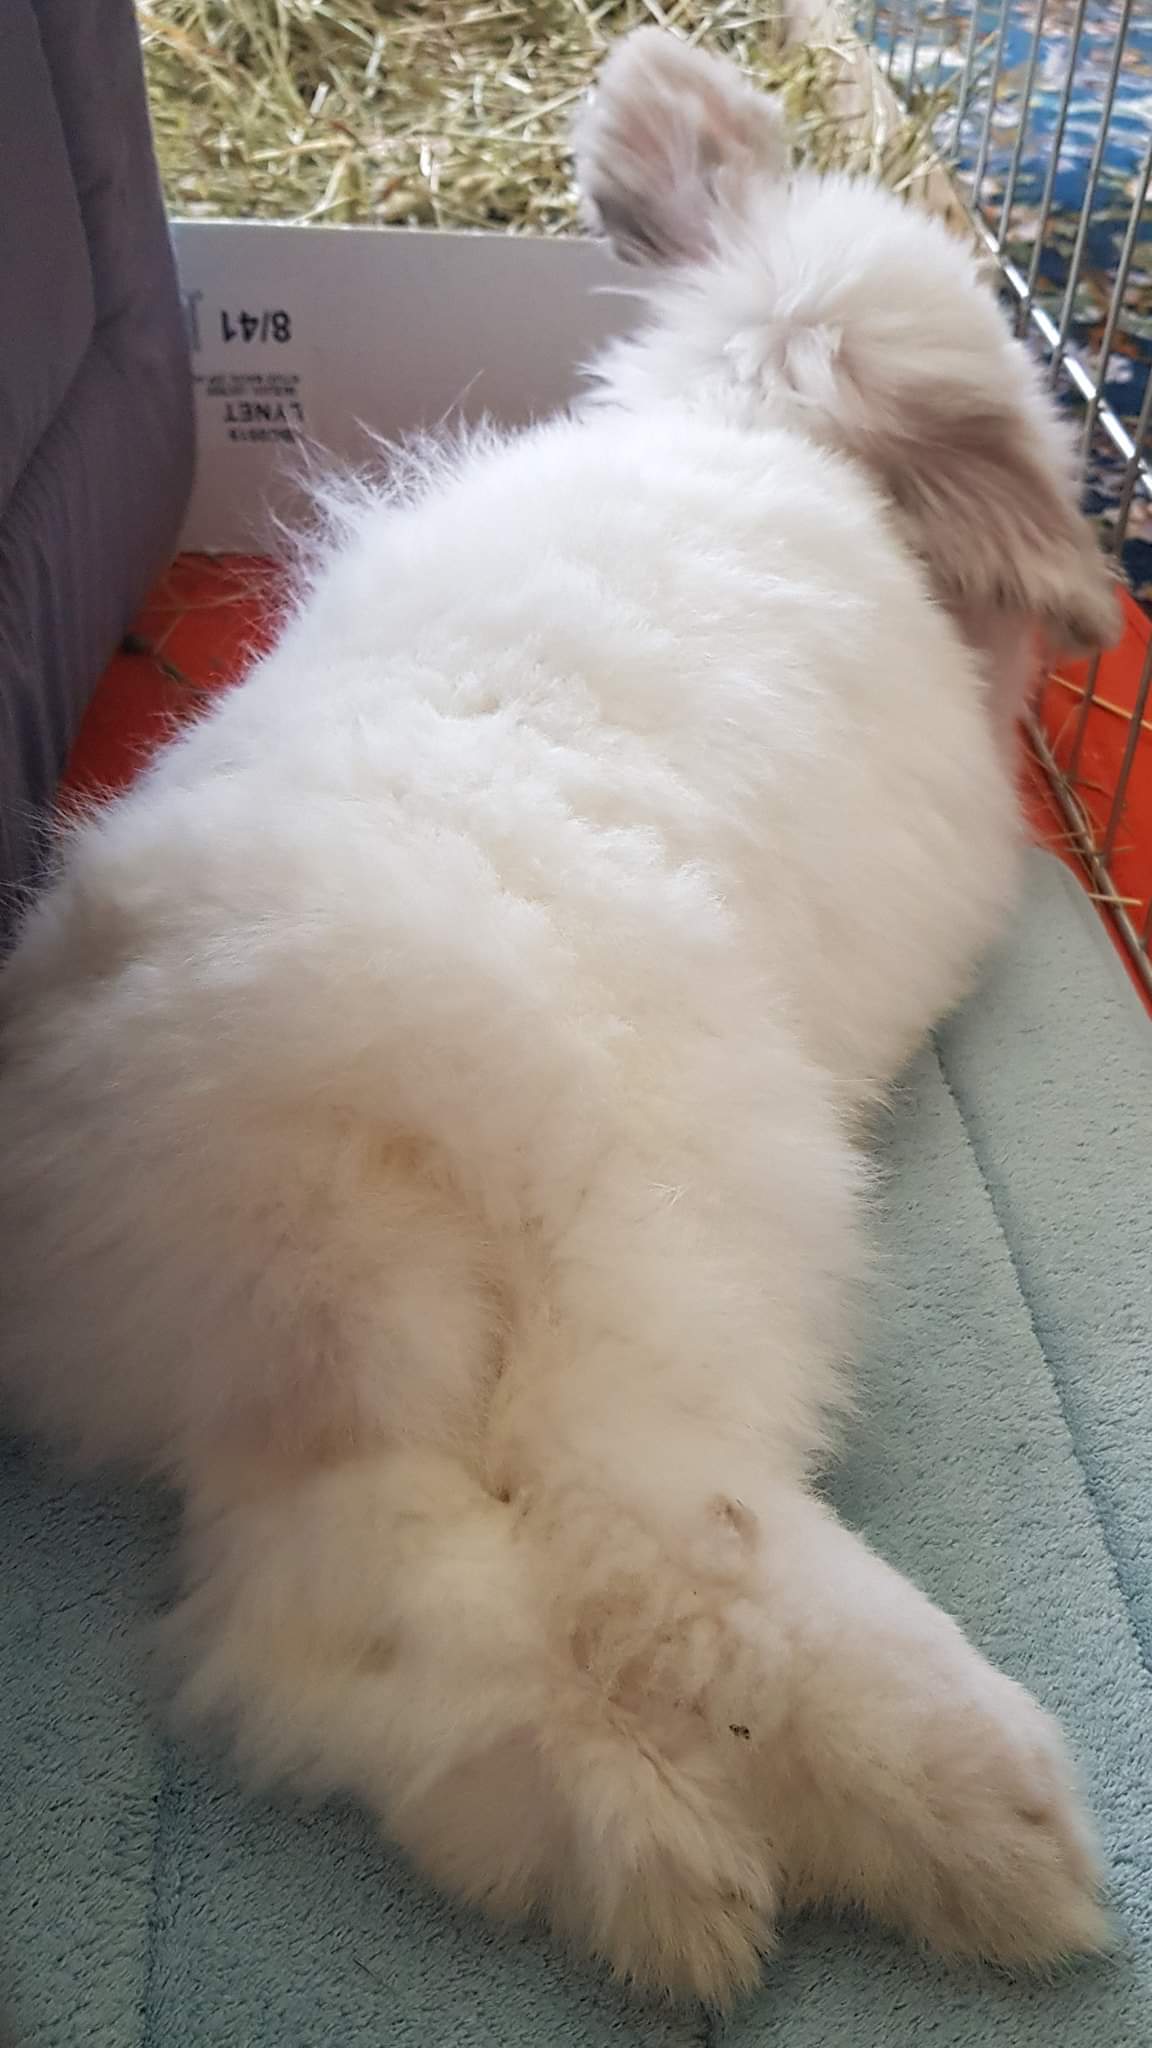 Freddie's first bunny butt Friday photo